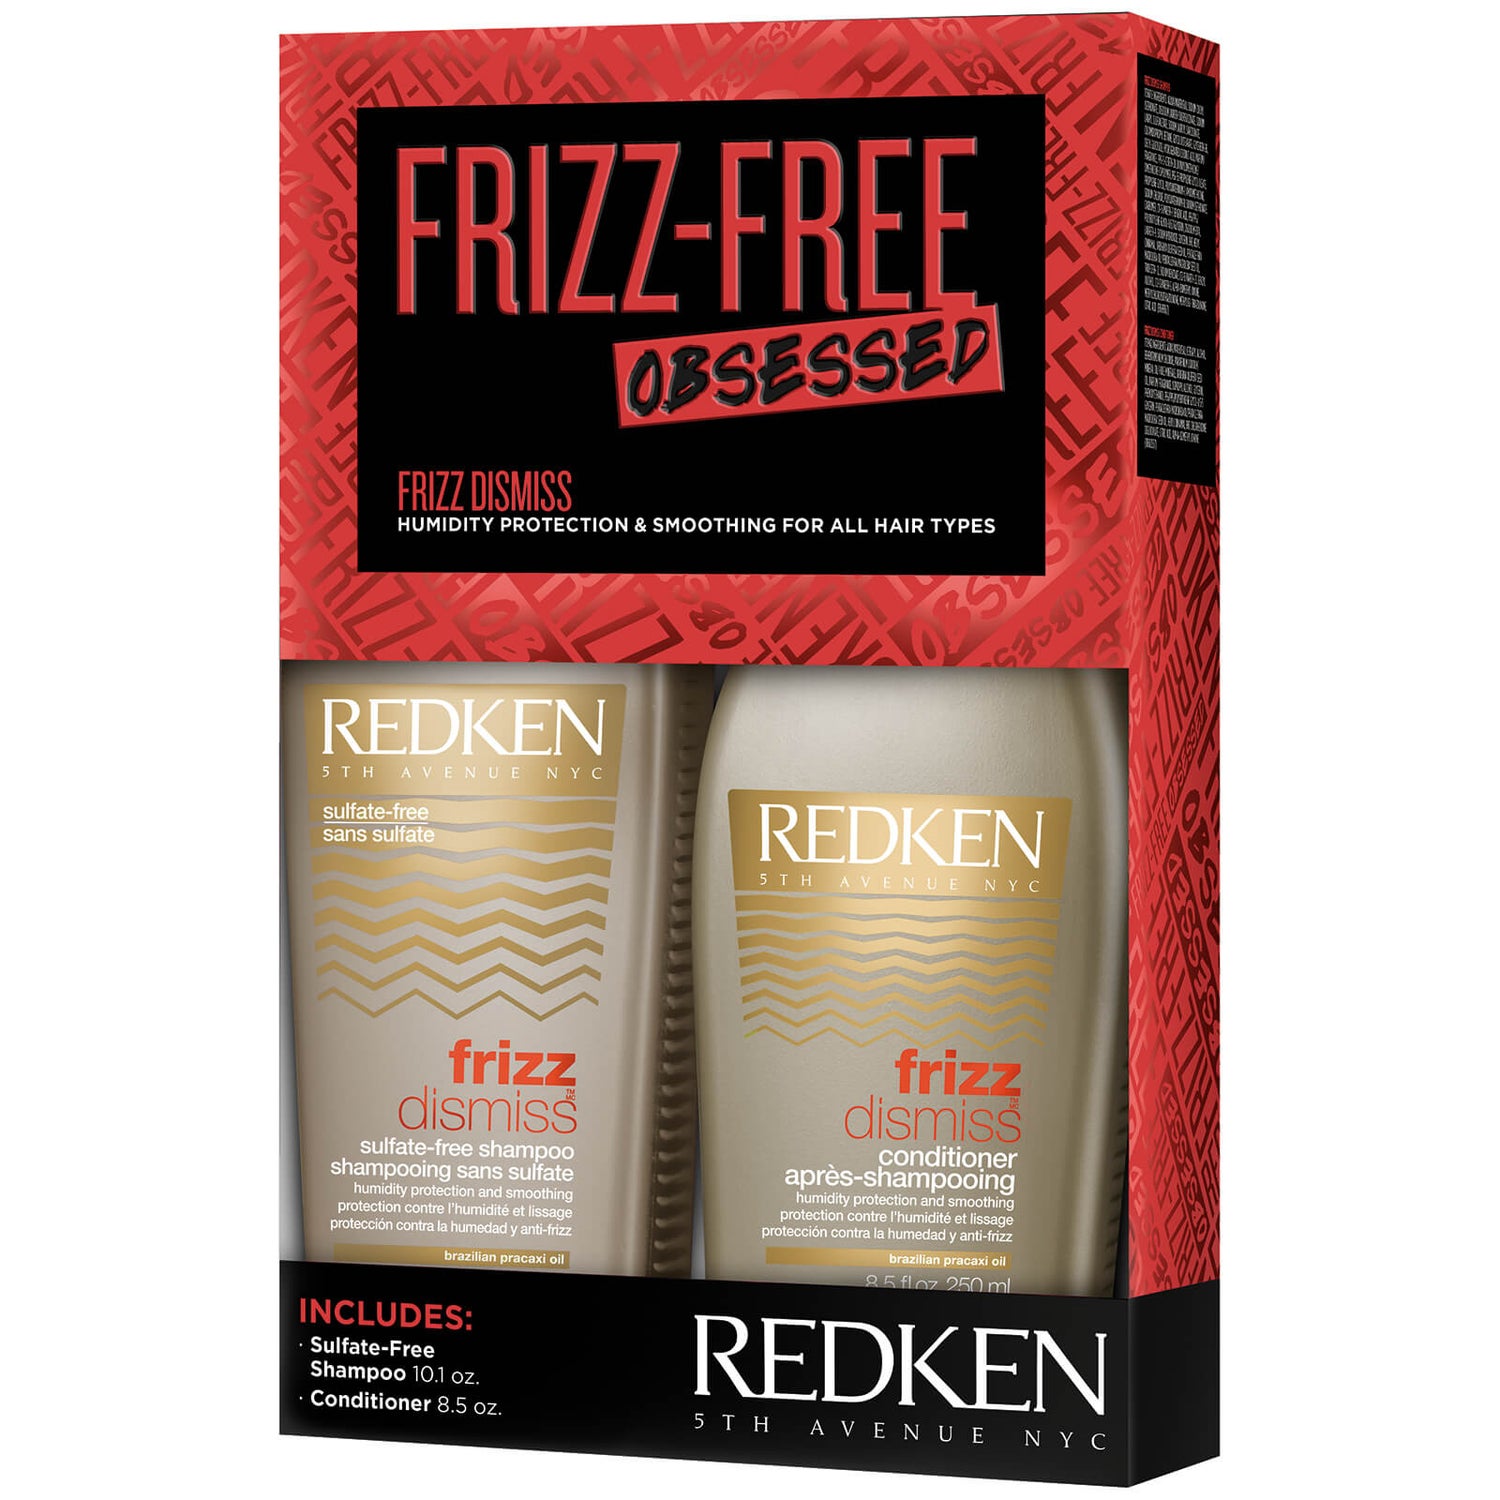 Redken Frizz-Free Obsessed Frizz Dismiss Duo